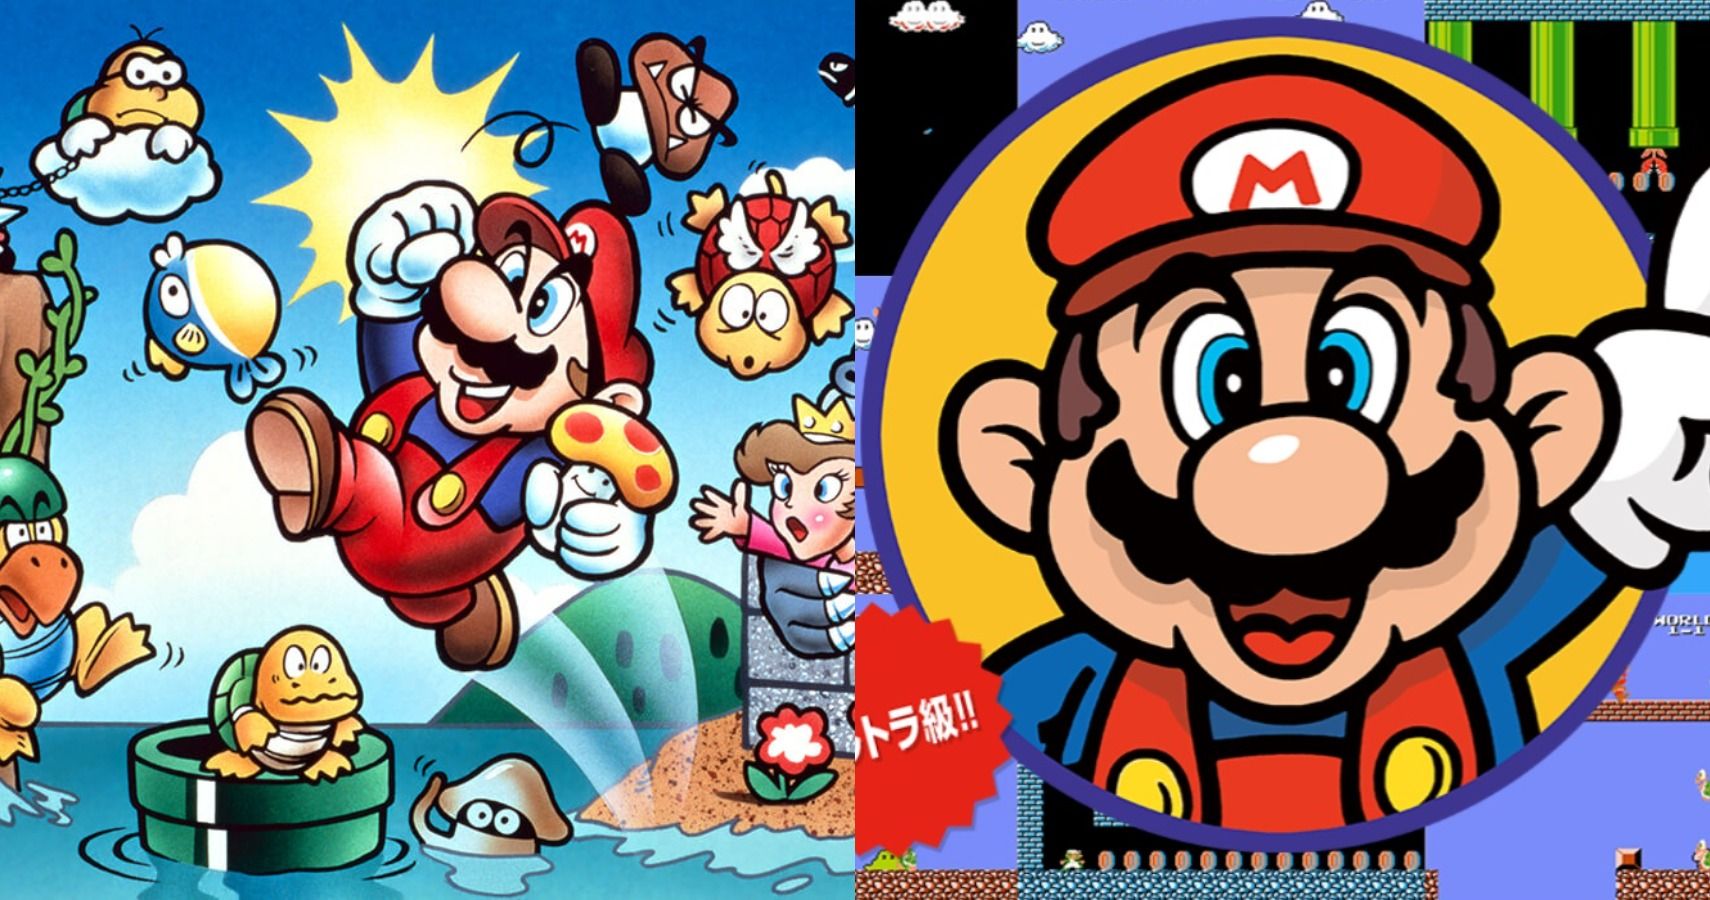 mario-creator-reveals-advice-he-would-give-the-iconic-plumber-if-he-was-35-years-old